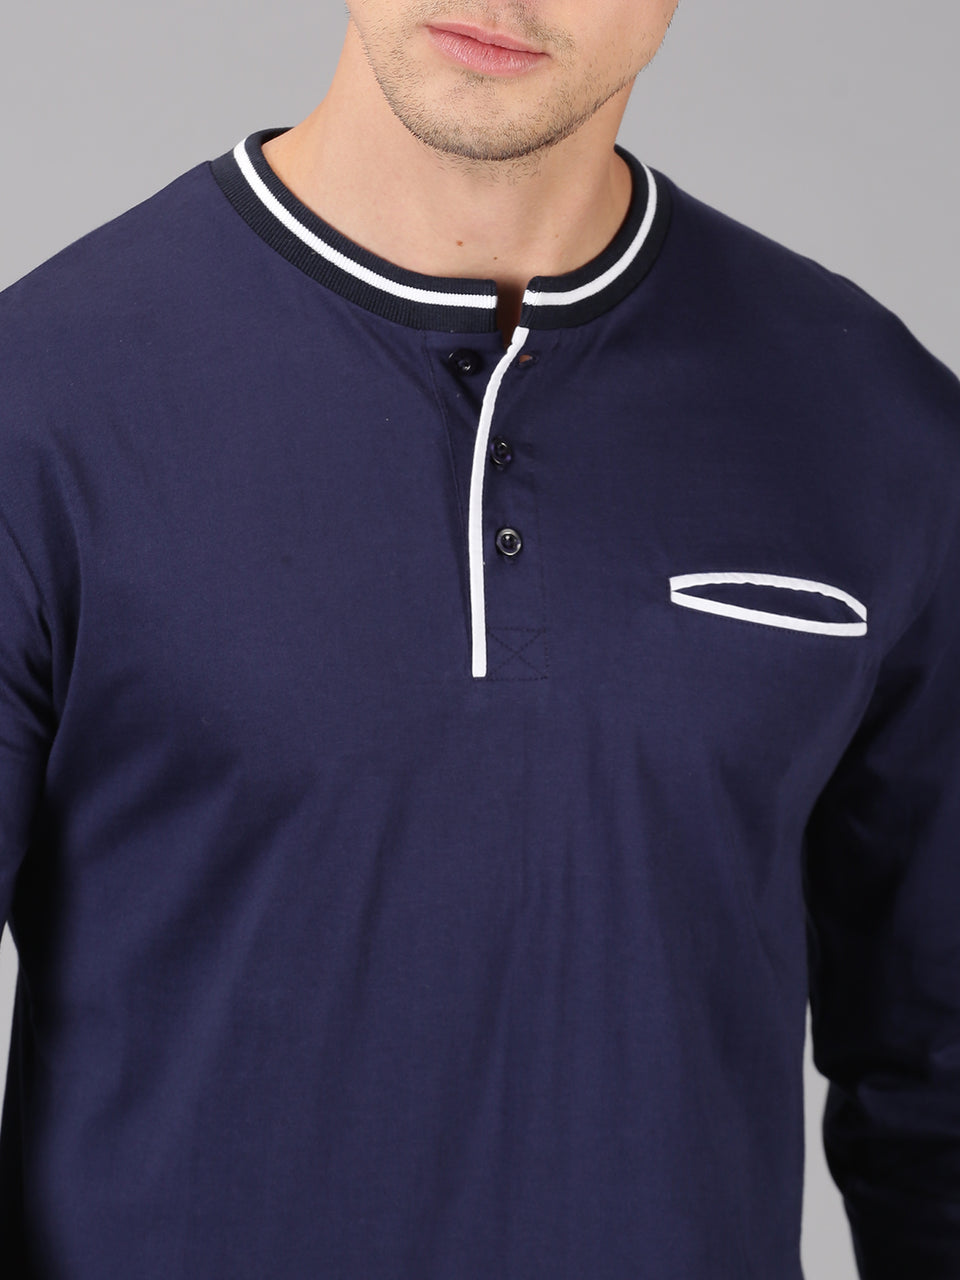 Men Navy Blue Plain Solid Trendy Neck Recycled Cotton Long Sleeve Regular Fit Casual T-Shirt with Pocket